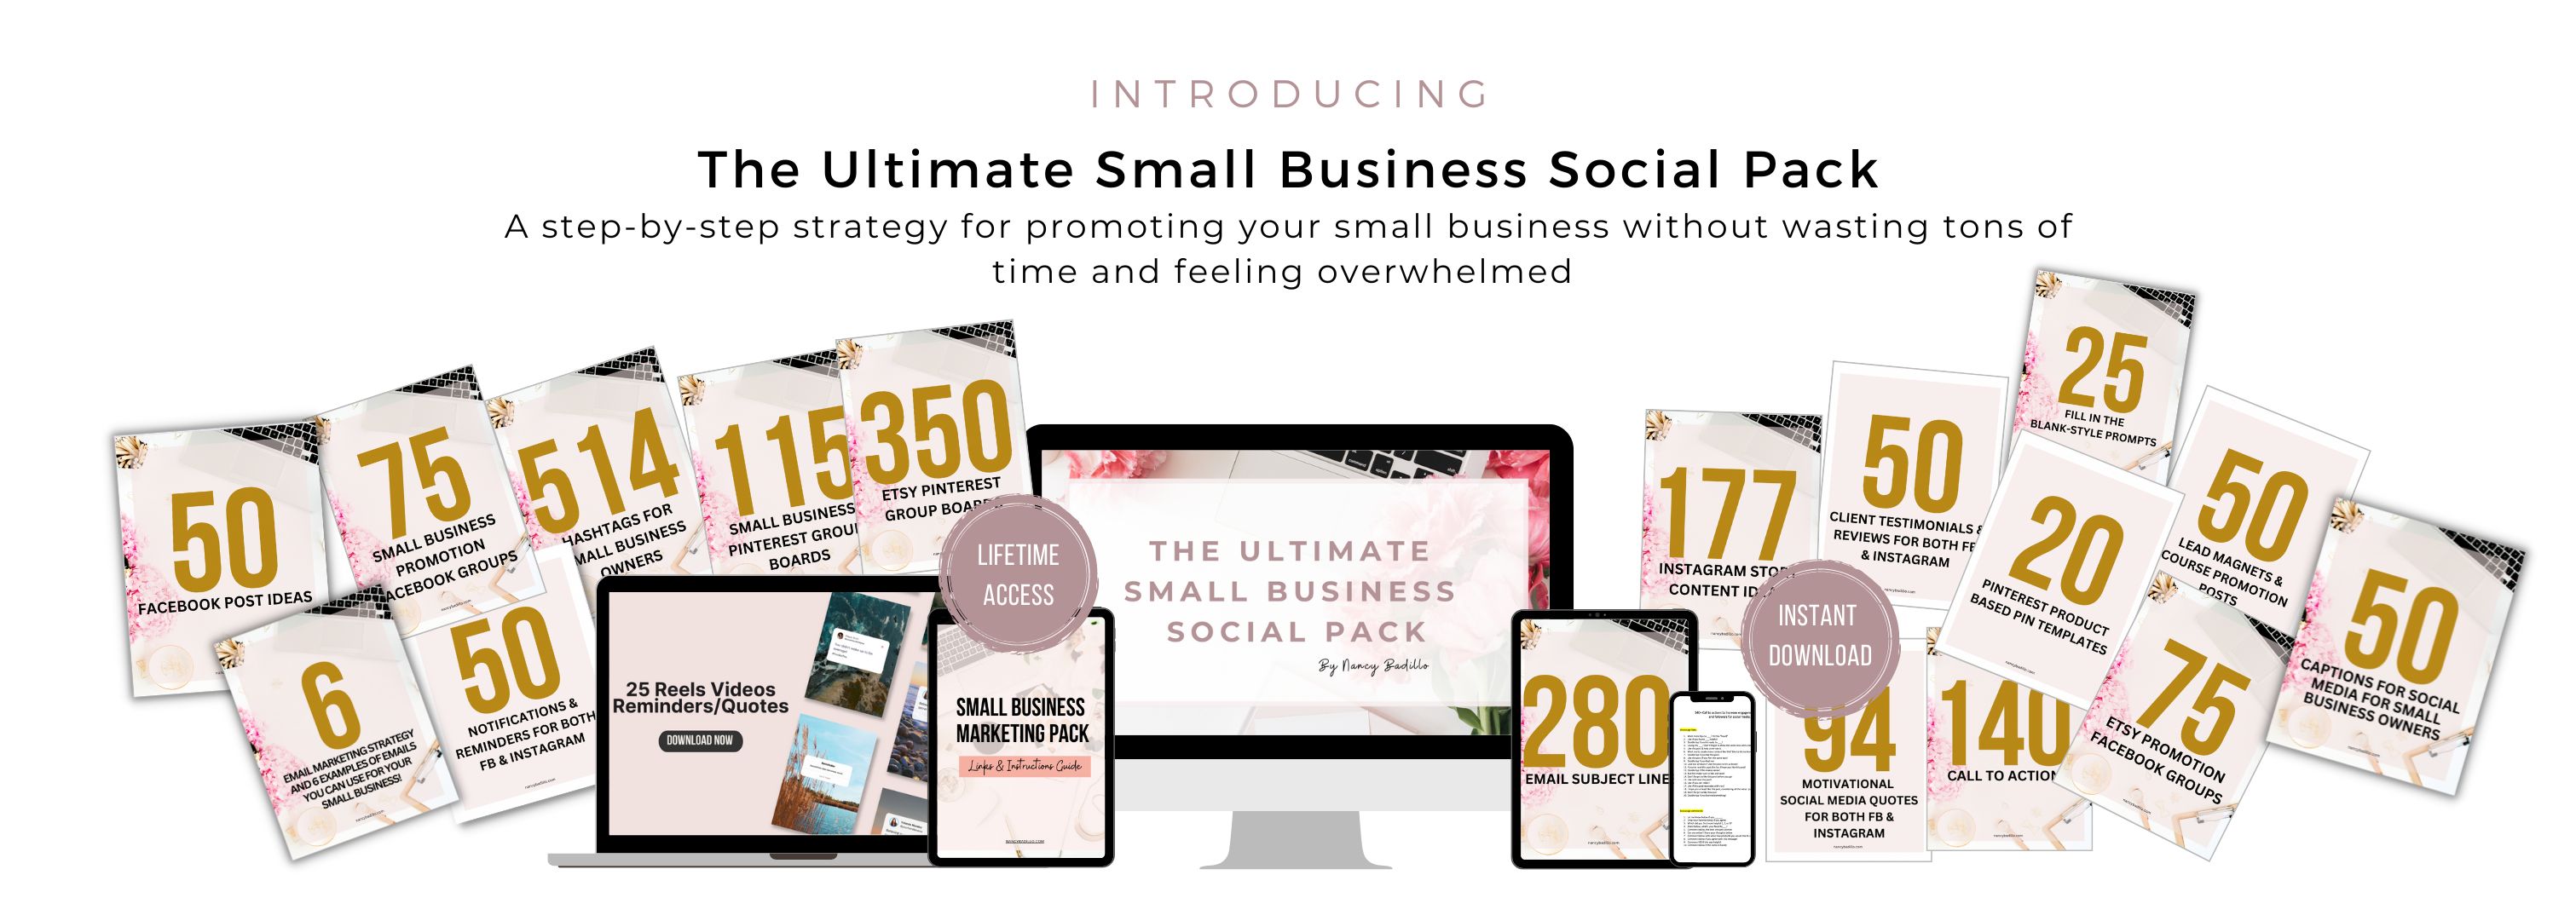 The-Ultimate-Small-Business-Social-Pack